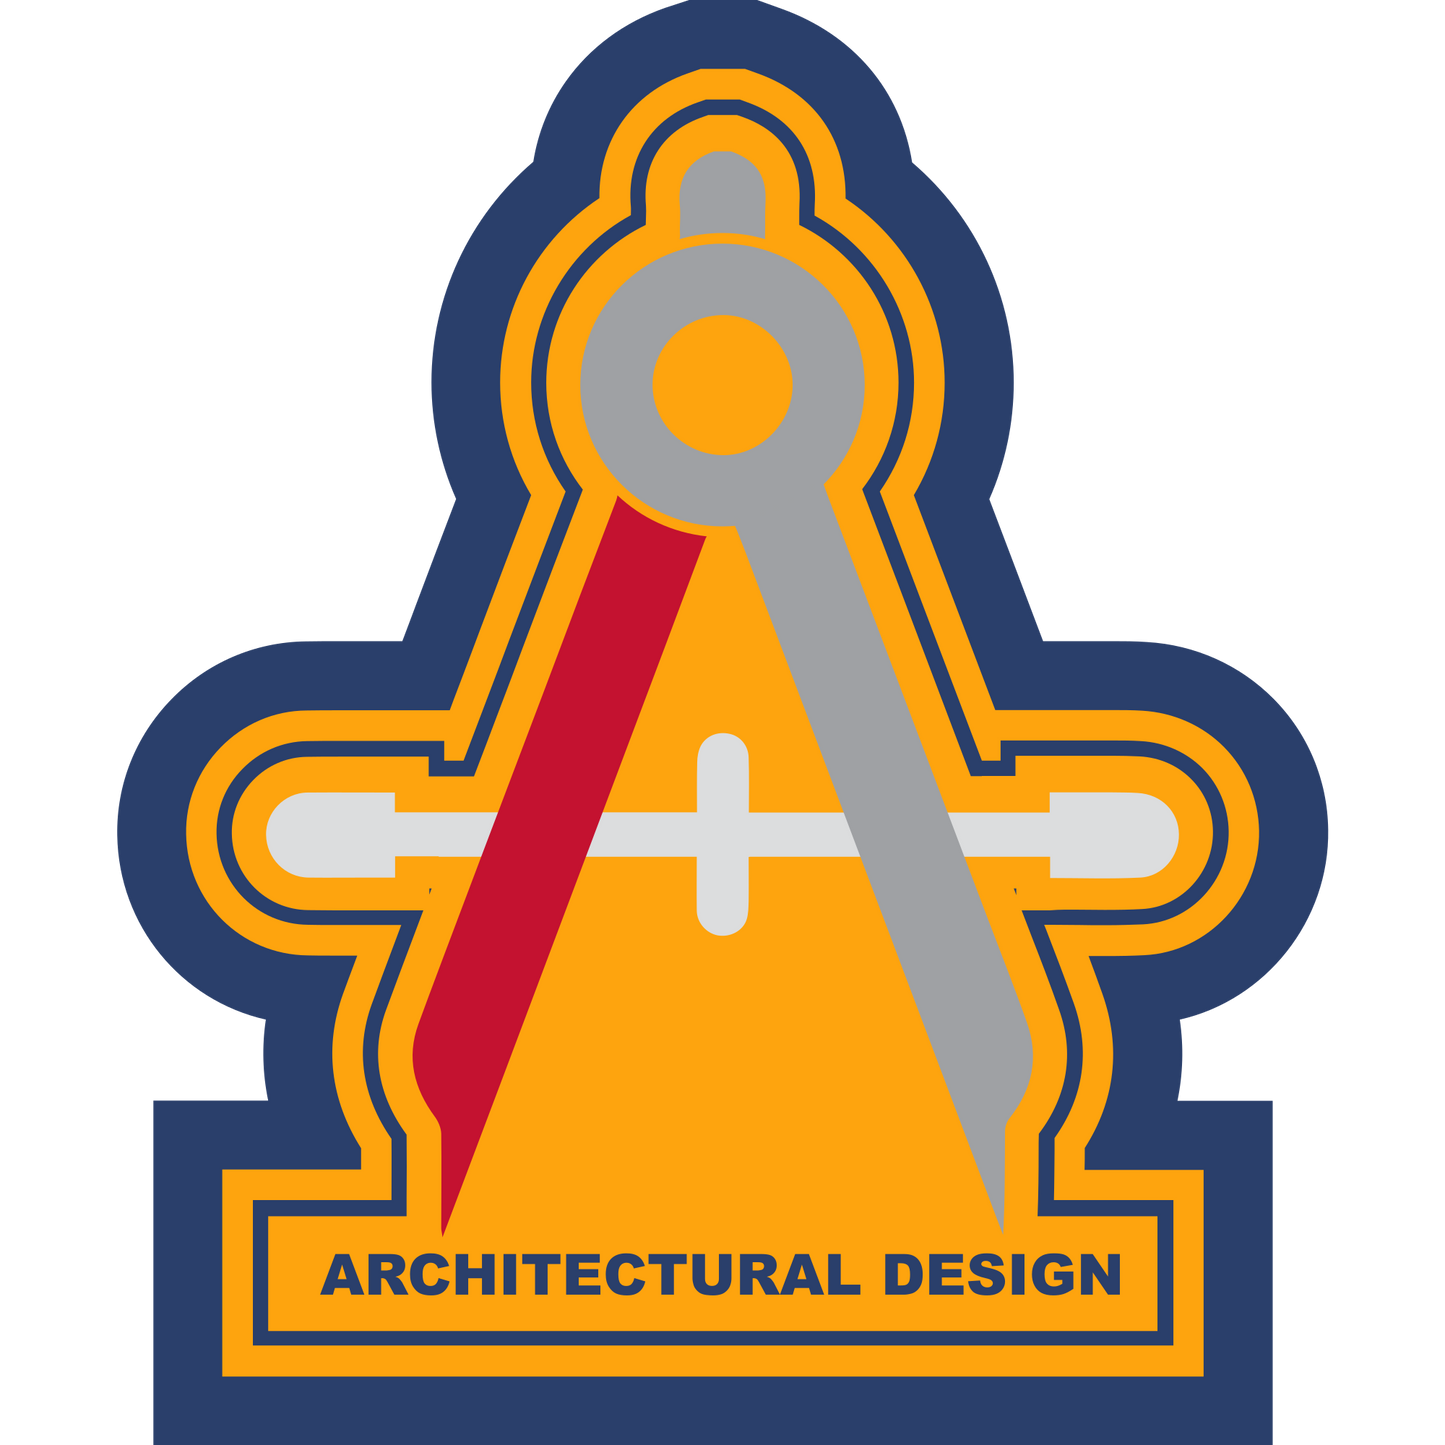 ARCHD - Architecture Sleeve Patch